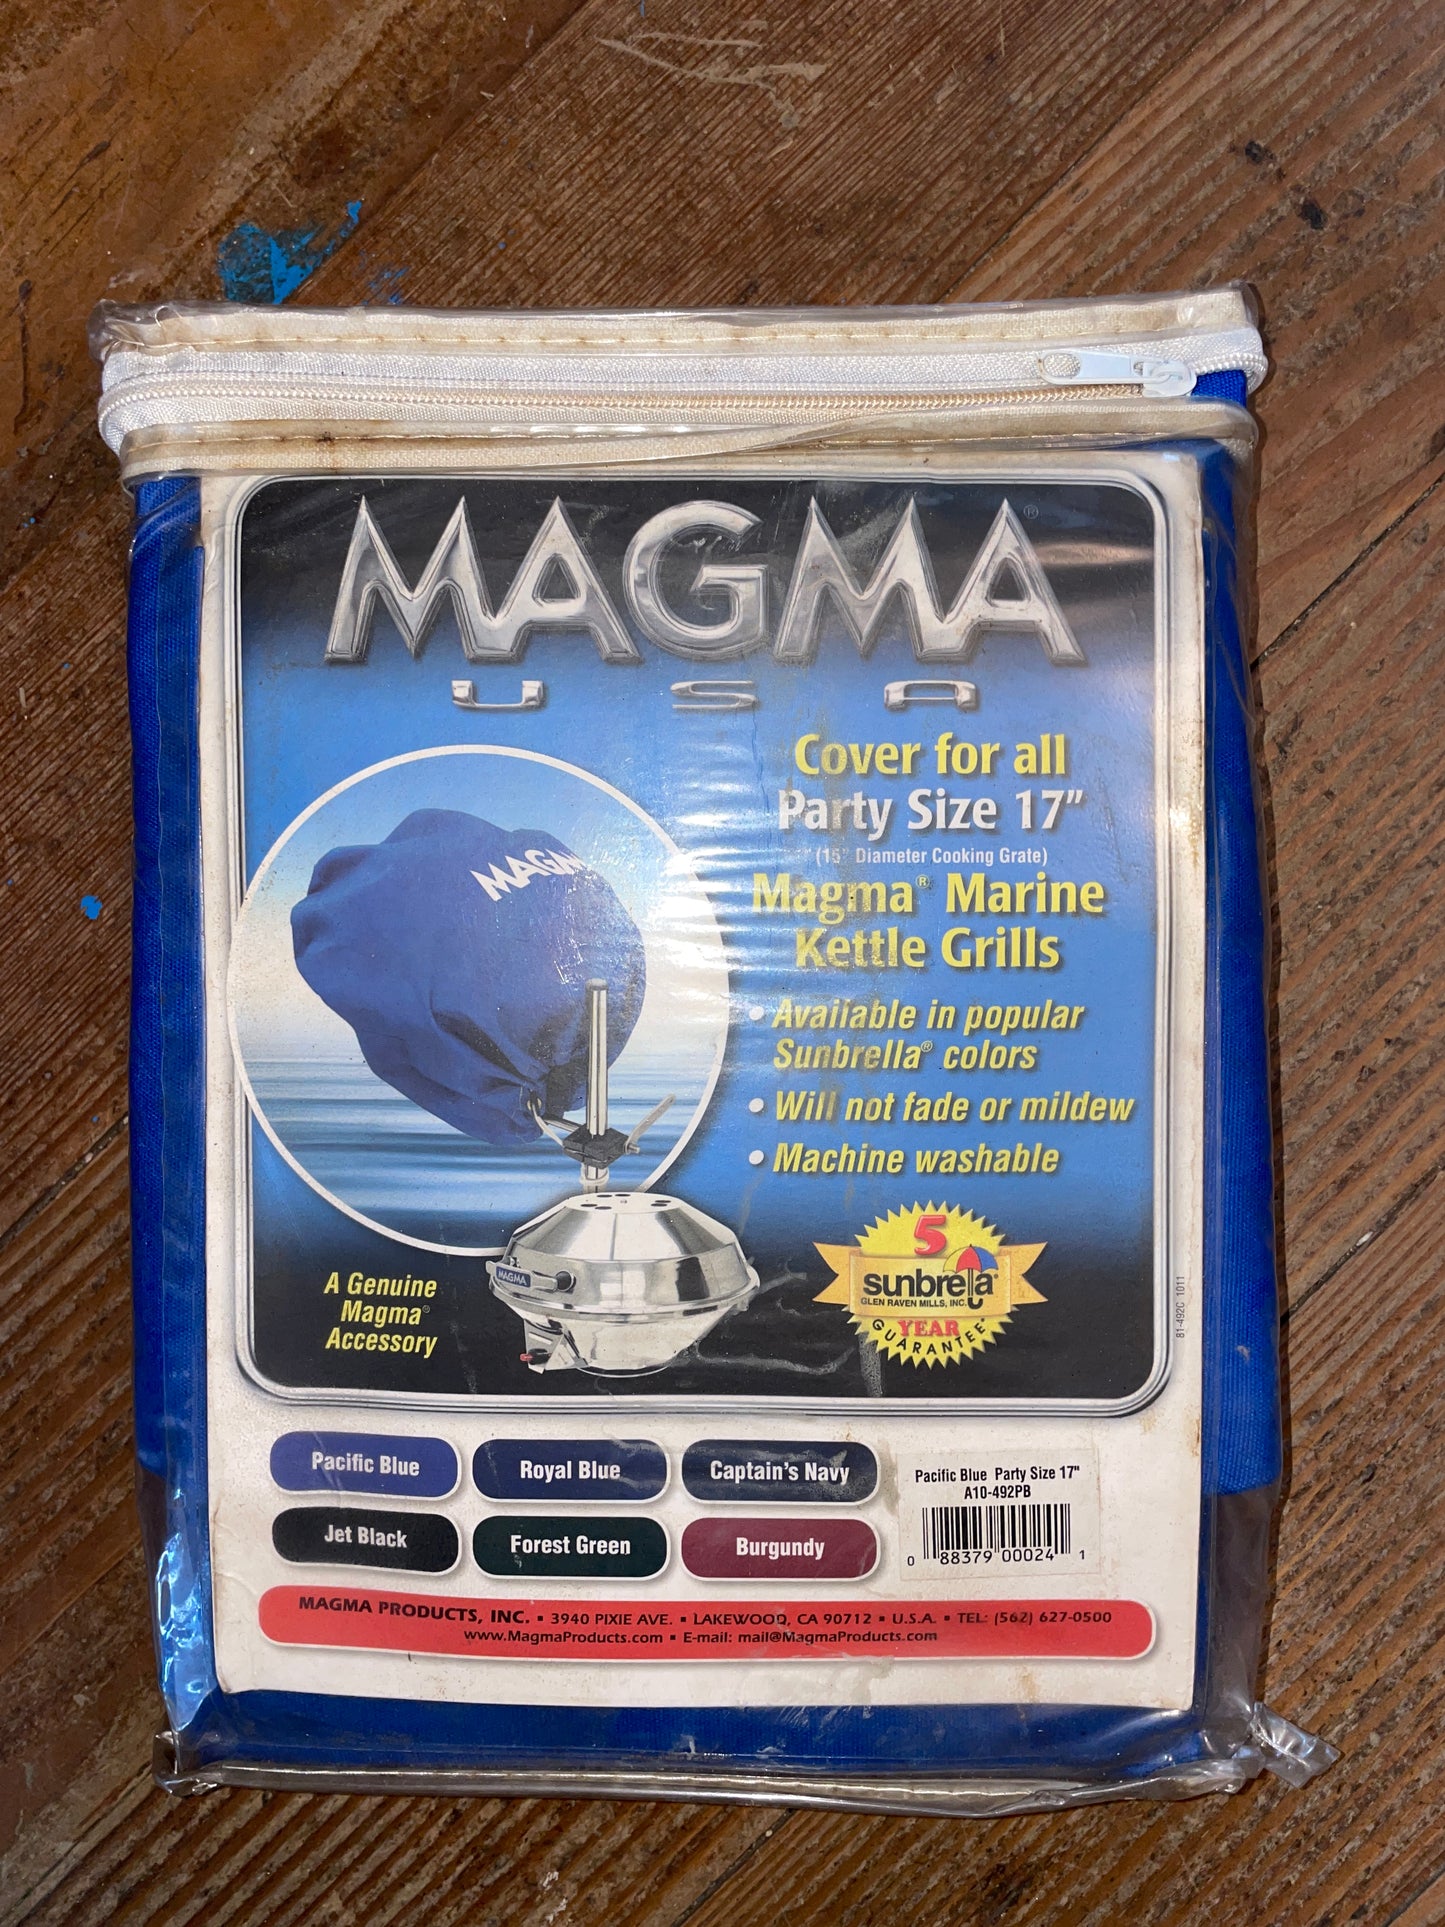 Magma Grill With Cover & Accessories